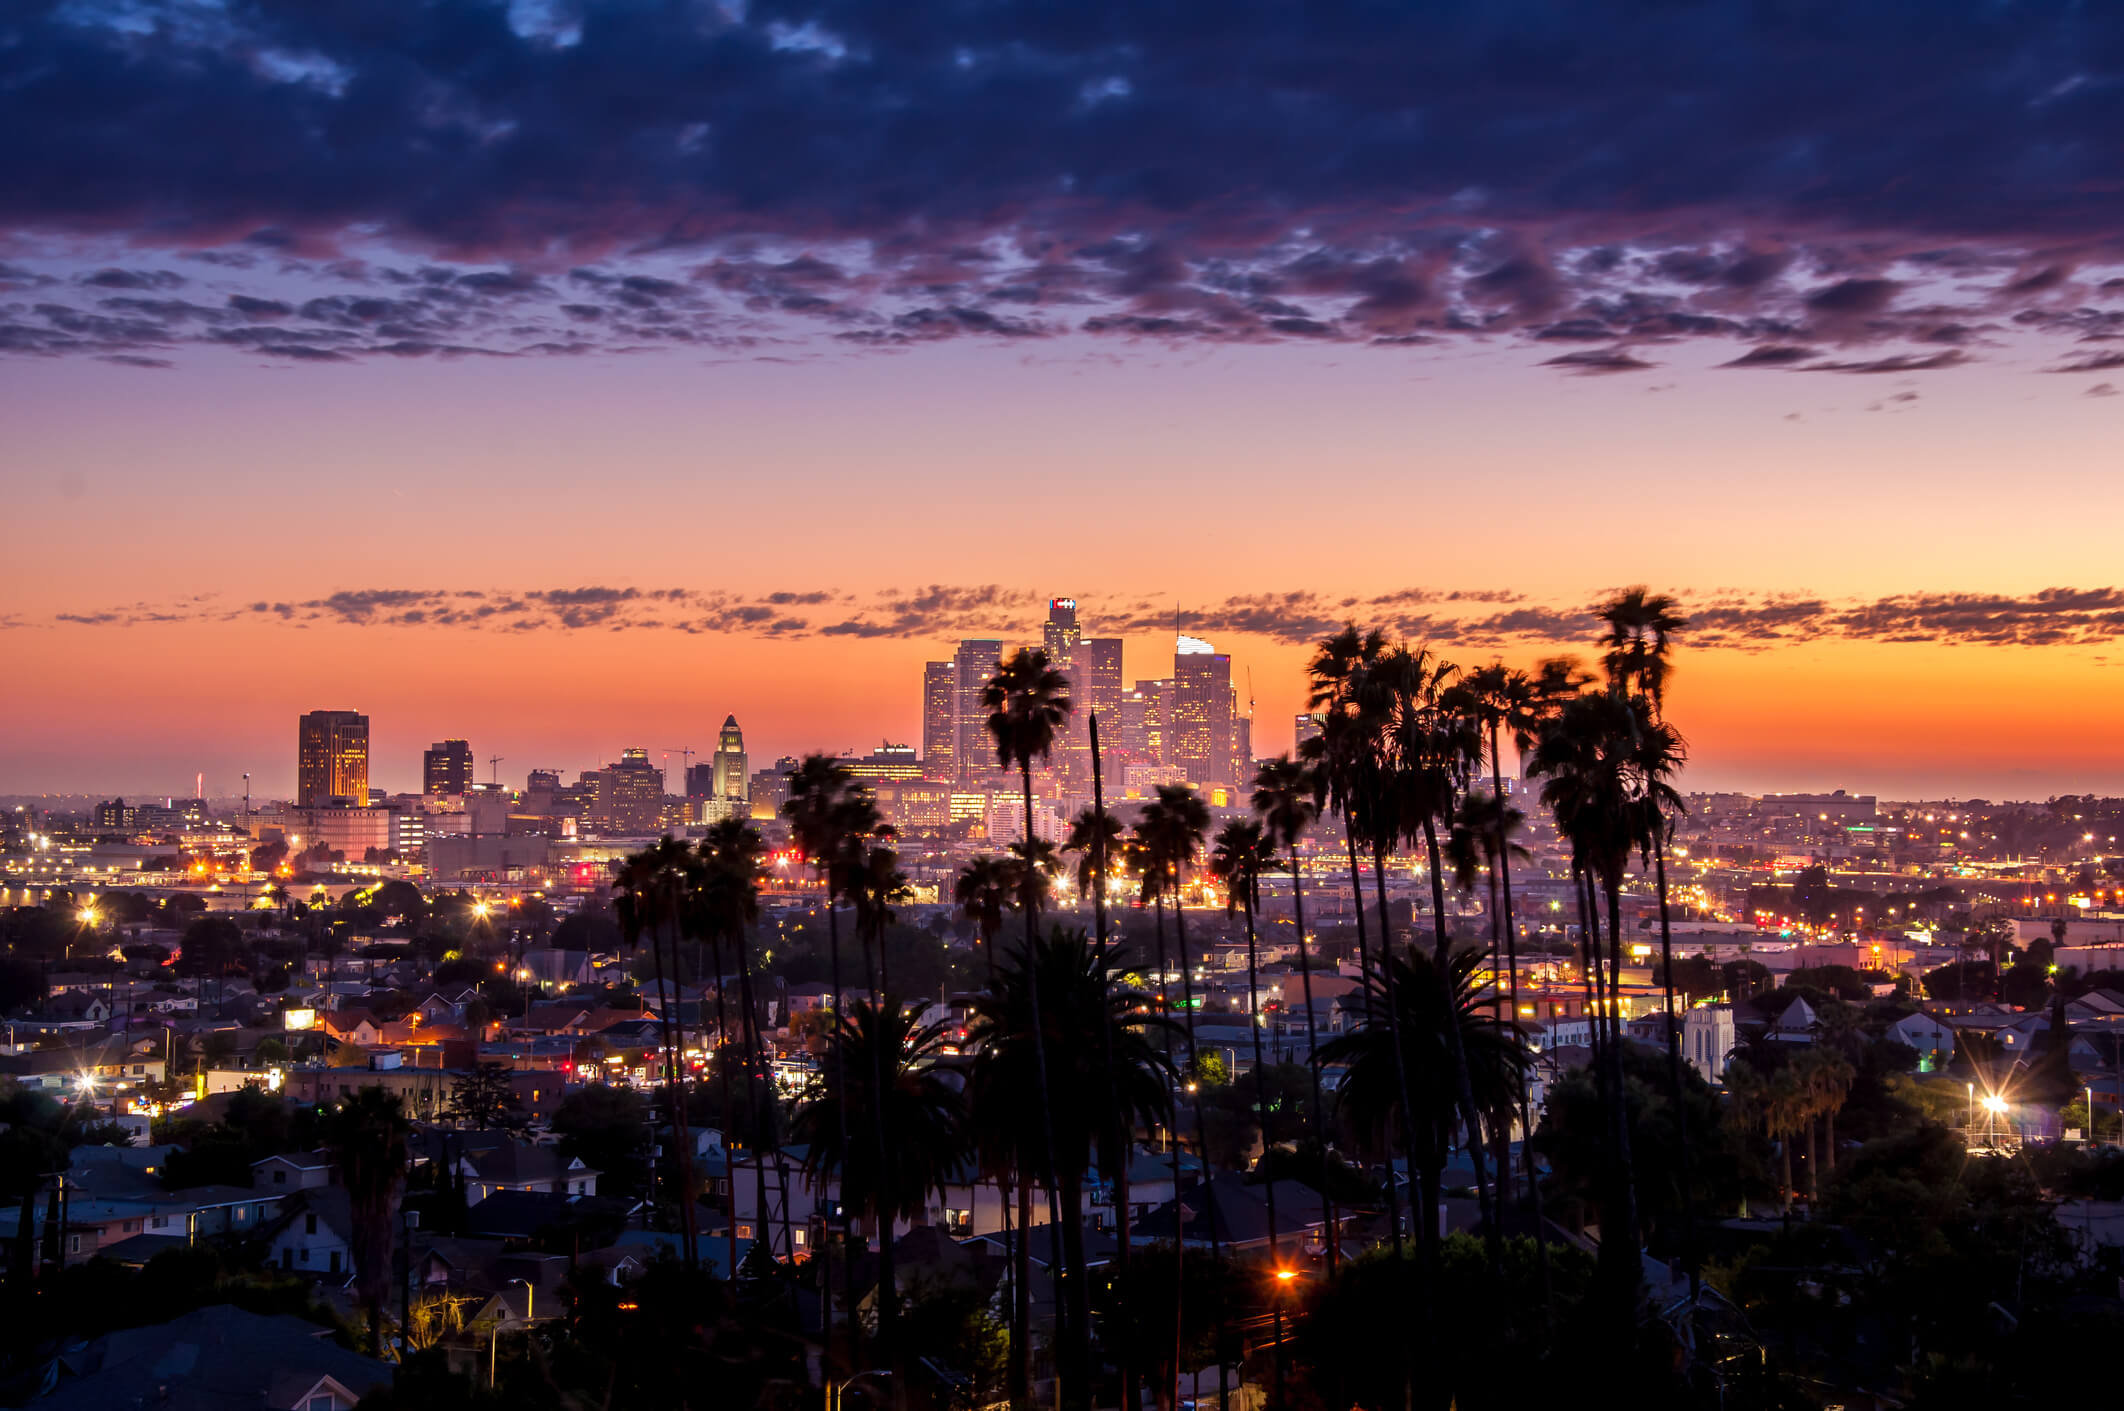 Beautiful night of Los Angeles downtown skyline and palm trees in foreground